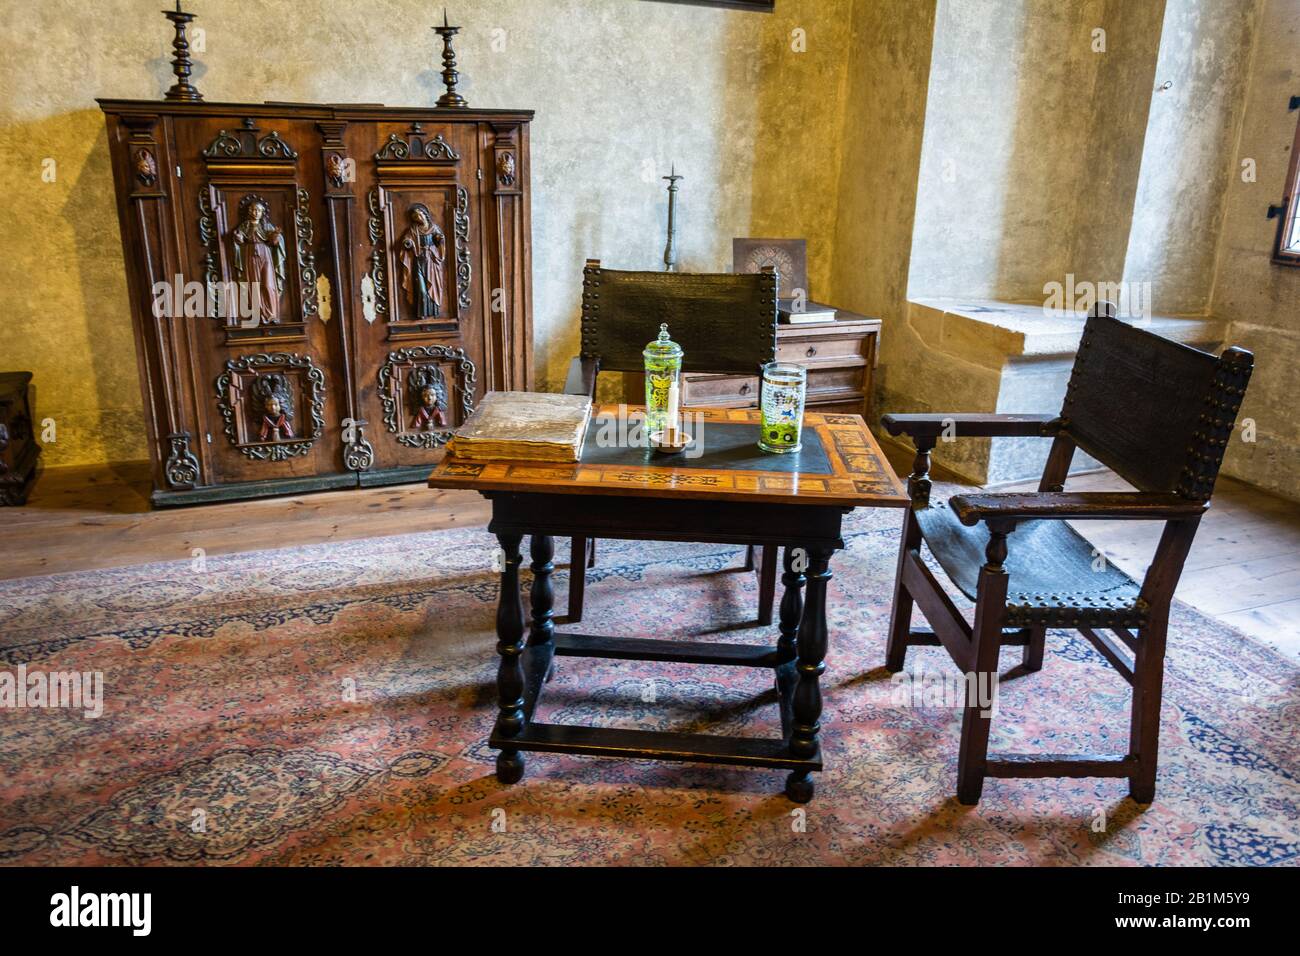 Karlstejn, Czech Republic – July 12, 2016. Interior view of a room at the Karlstejn medieval castle, with period furniture. Stock Photo